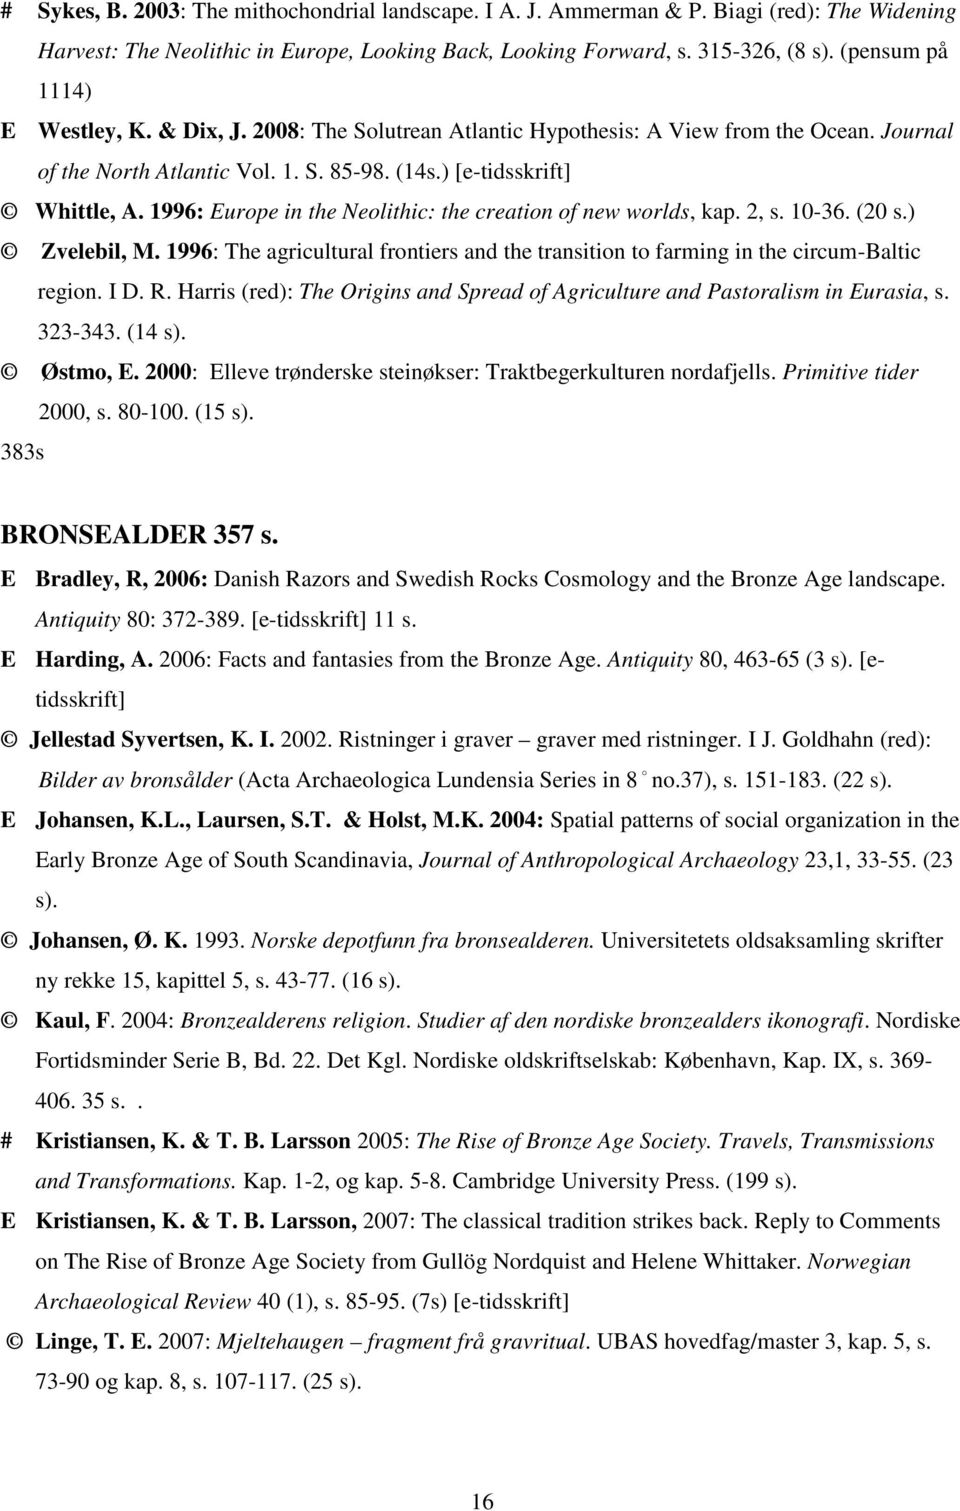 1996: Europe in the Neolithic: the creation of new worlds, kap. 2, s. 10-36. (20 s.) Zvelebil, M. 1996: The agricultural frontiers and the transition to farming in the circum-baltic region. I D. R.